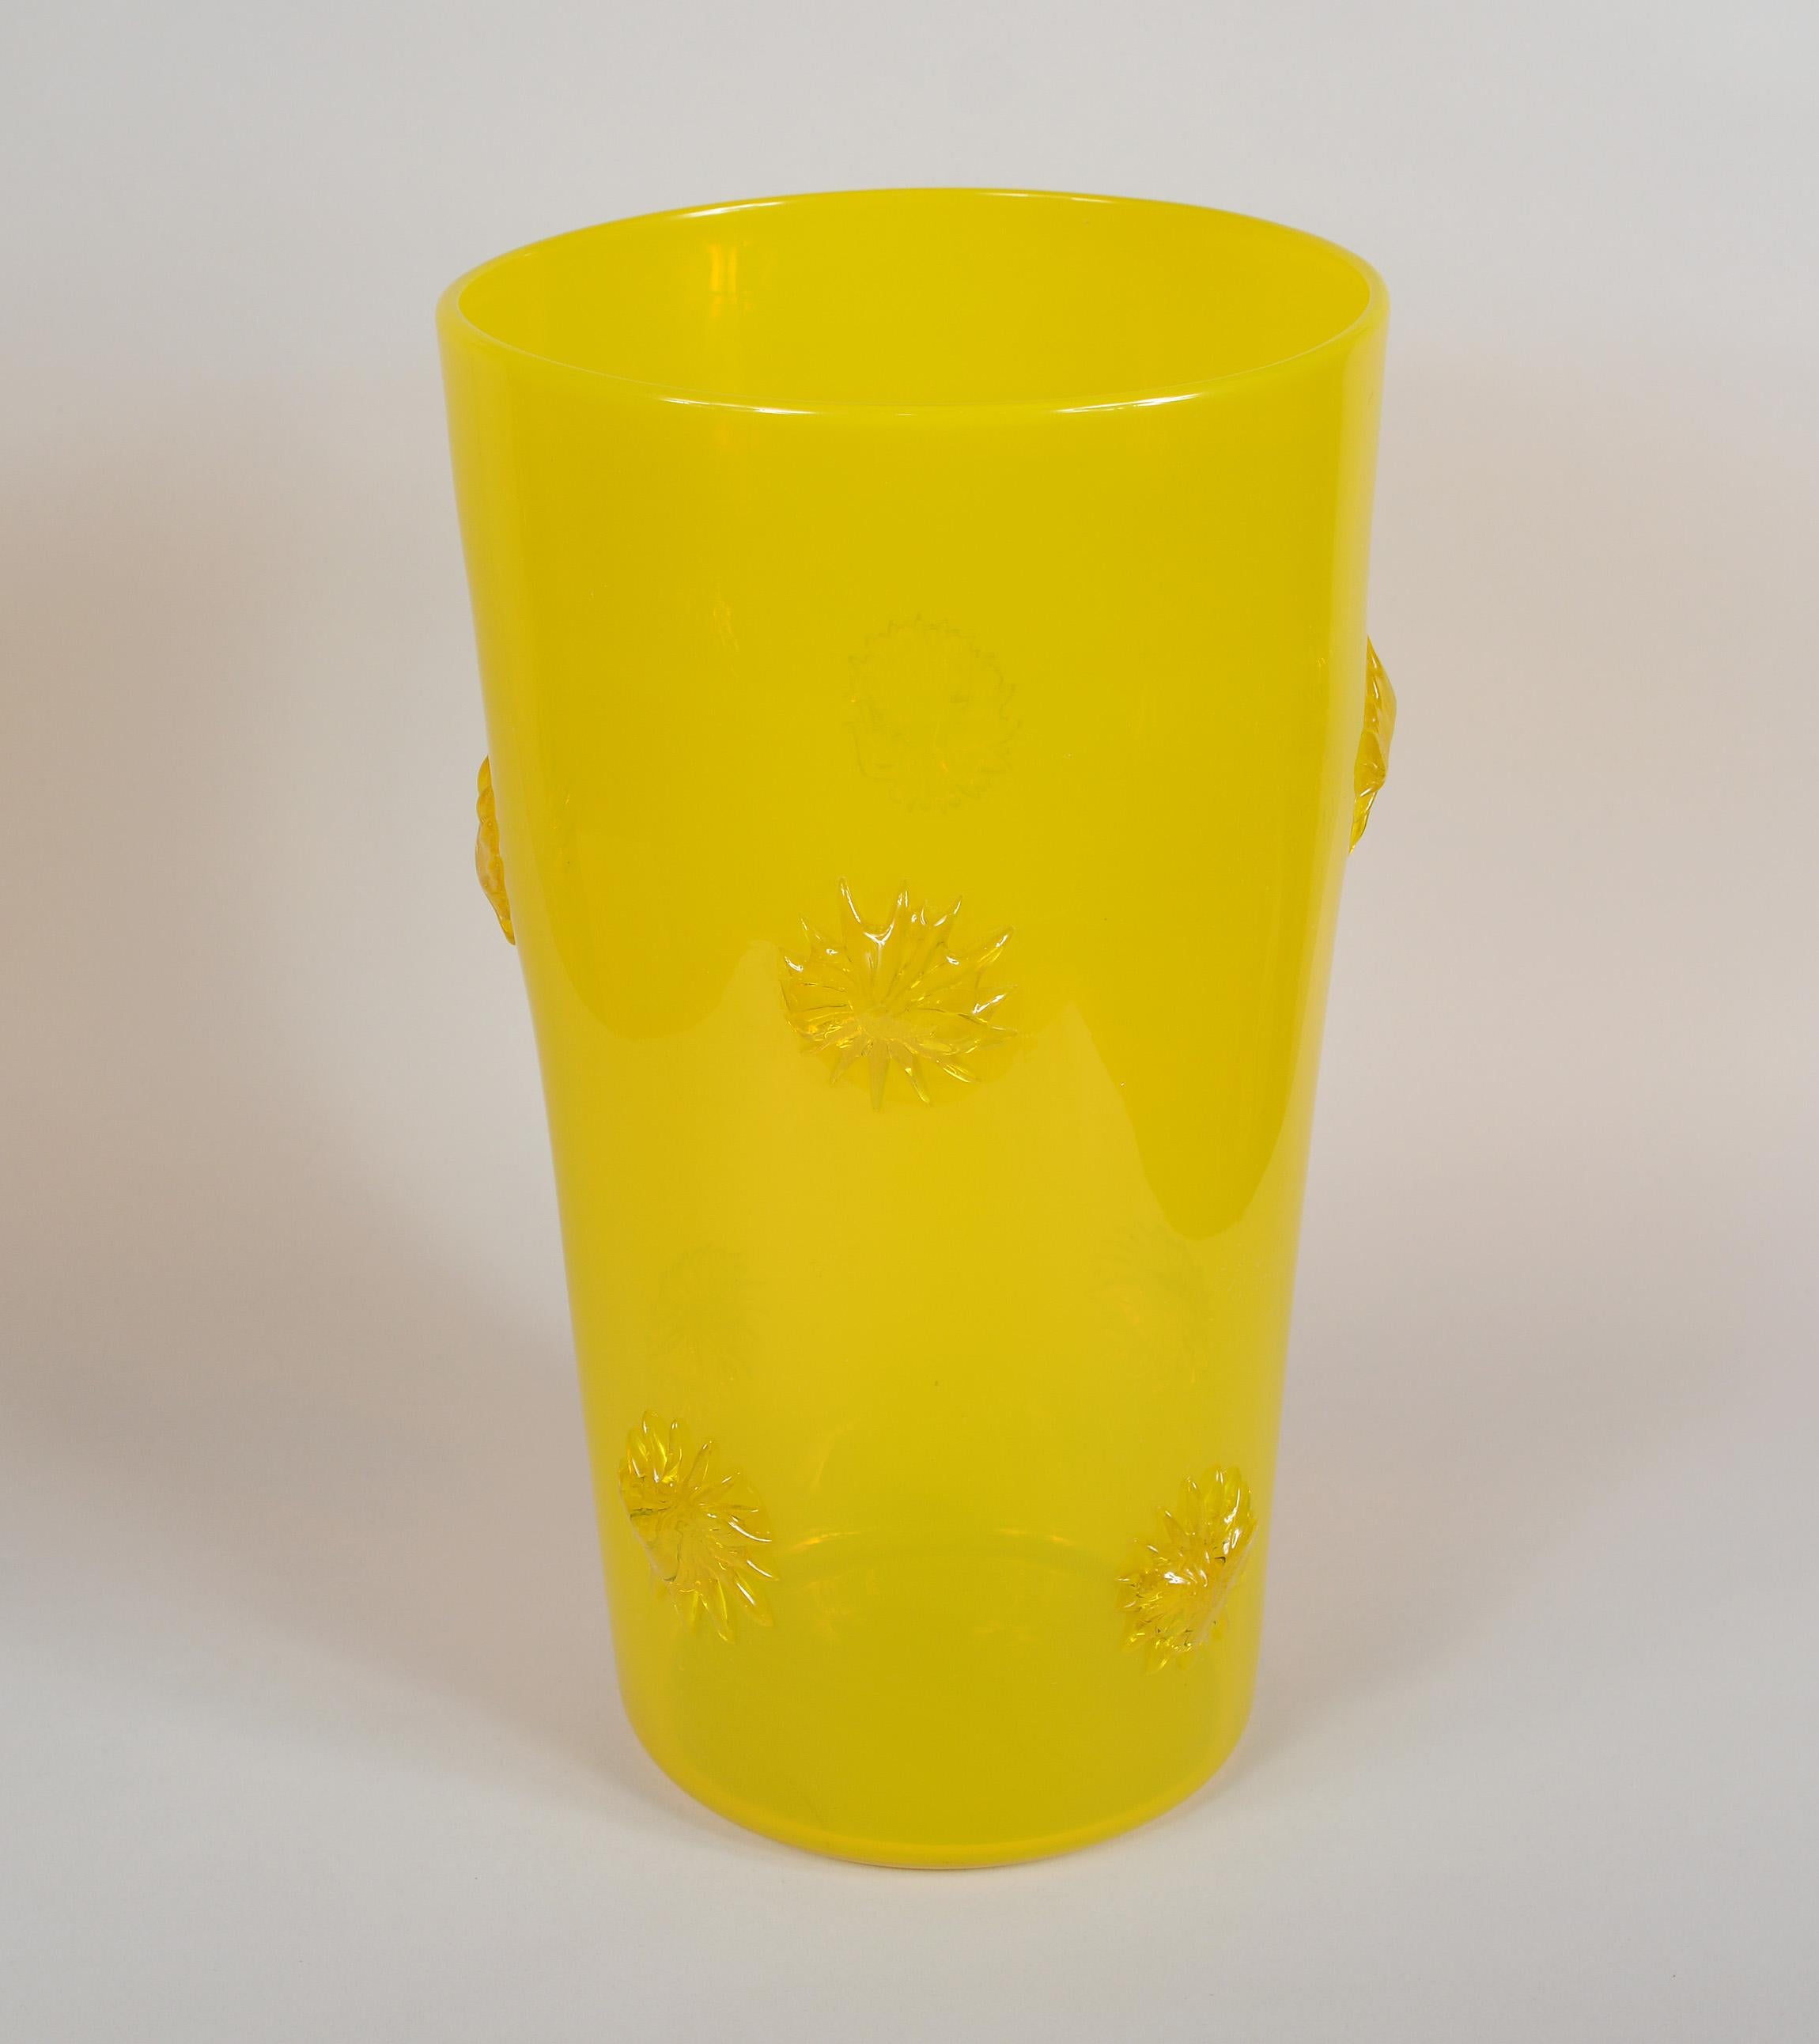 Opalescent yellow glass vase from the Empoli region of Italy. This has applied starbursts around the vase.